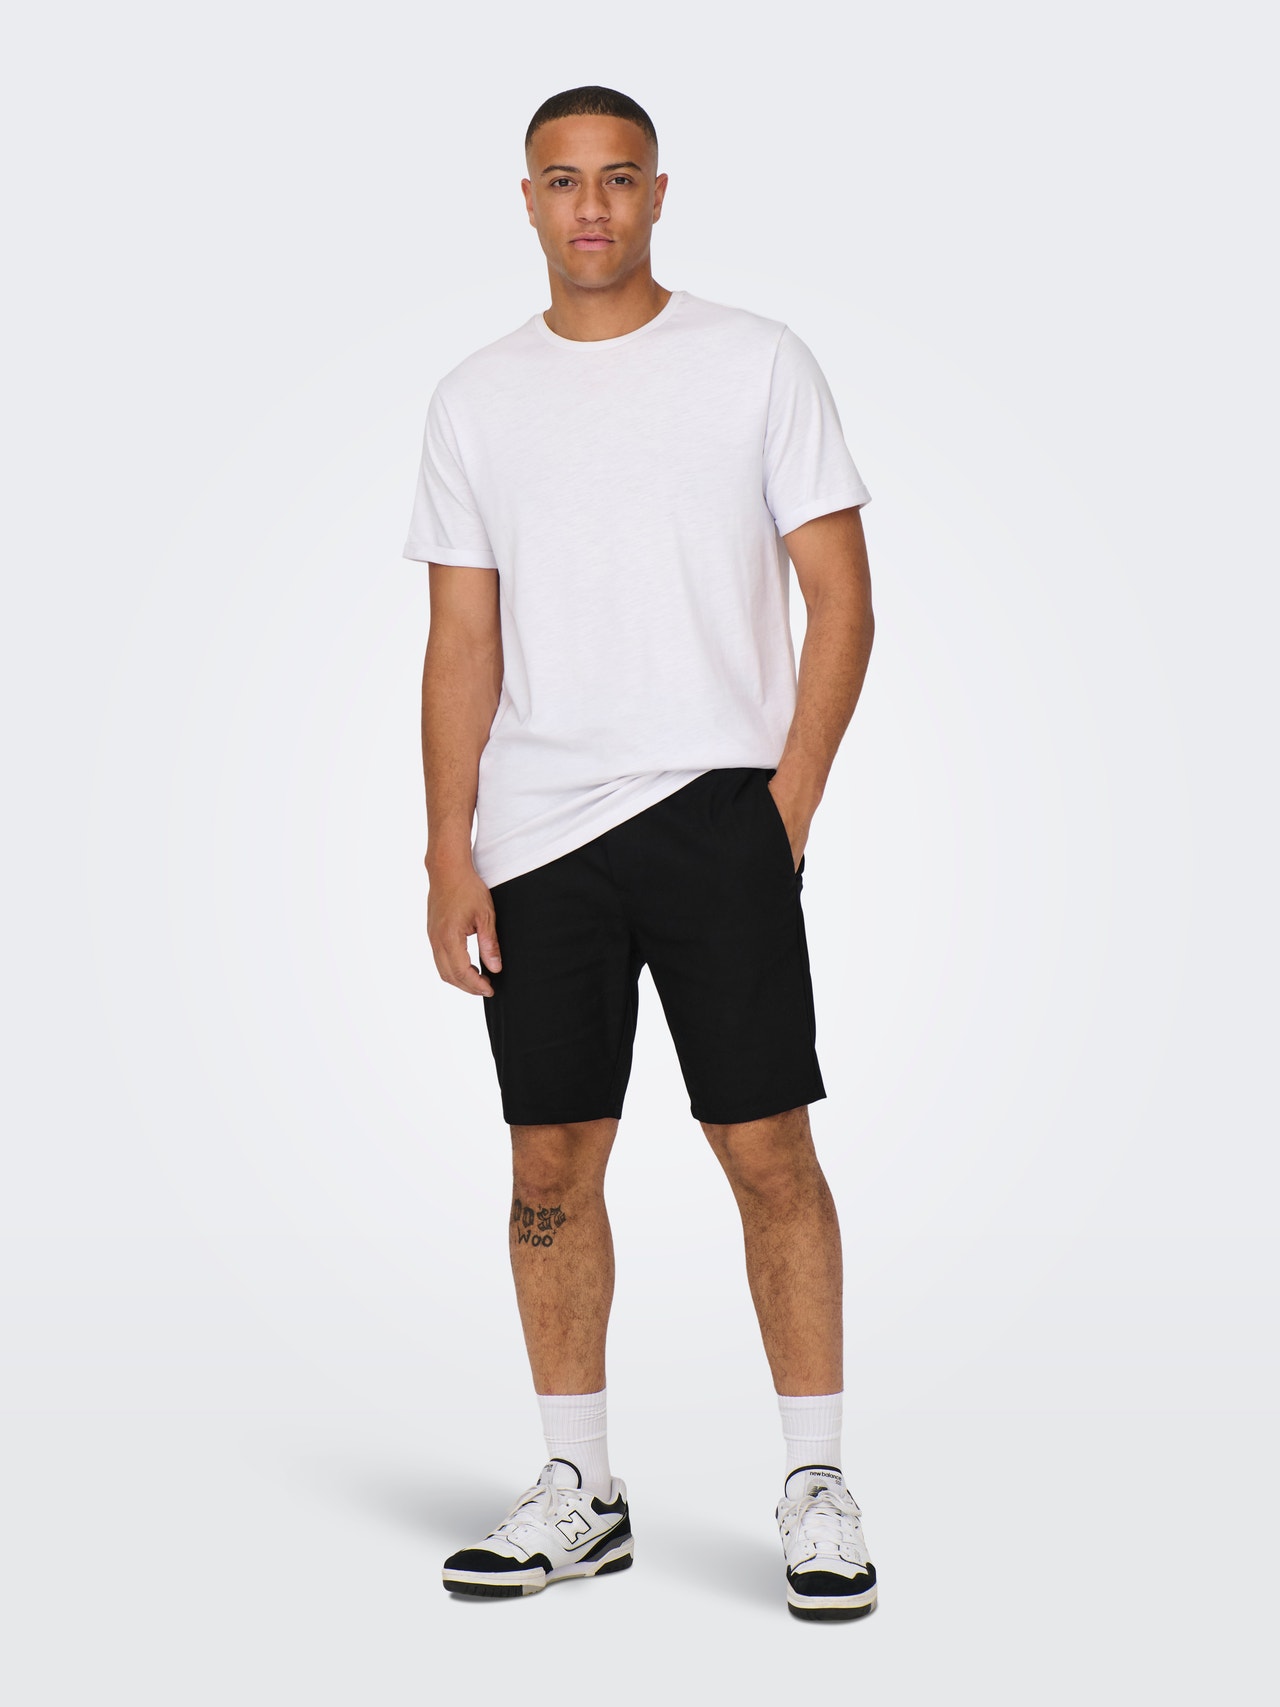 ONLY & SONS Comfort Fit Mid waist Shorts -Black - 22021824